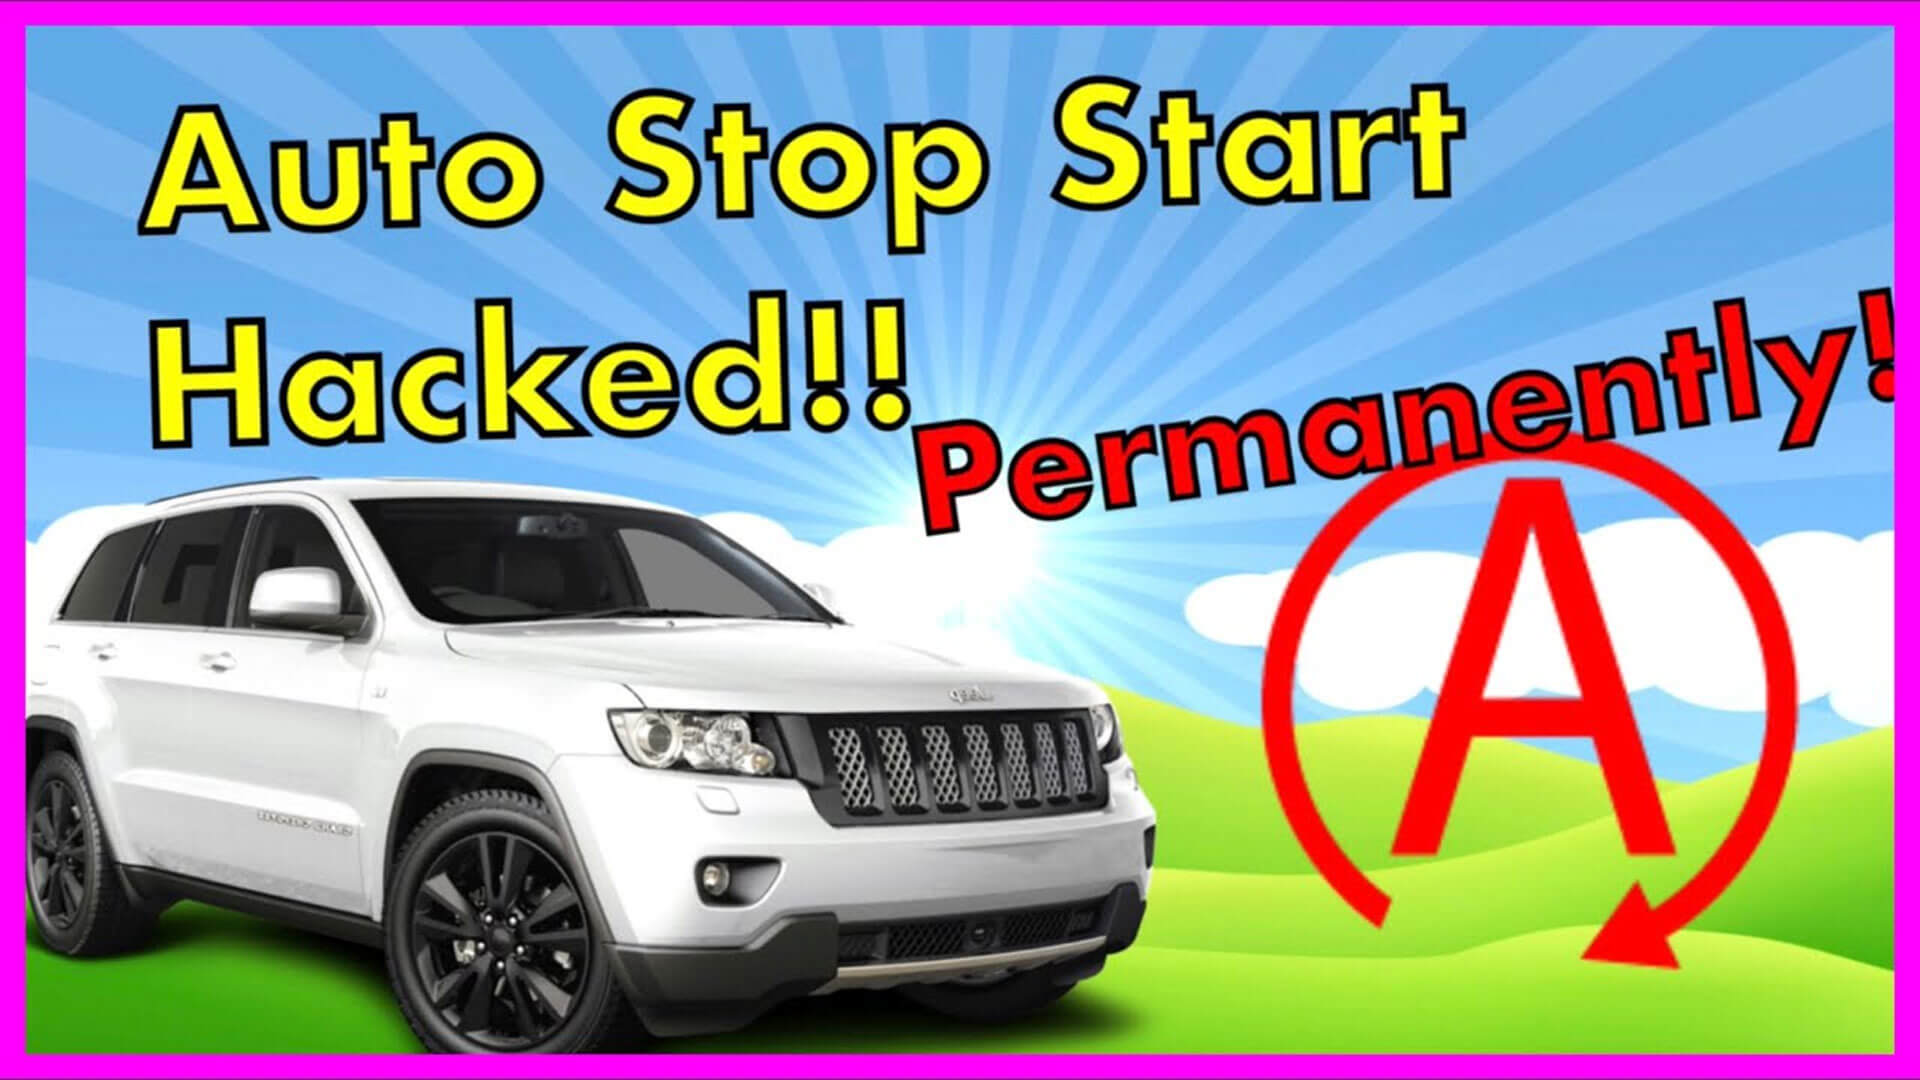 How to Fix a 2015 Jeep Grand Cherokee Remote Start Disabled